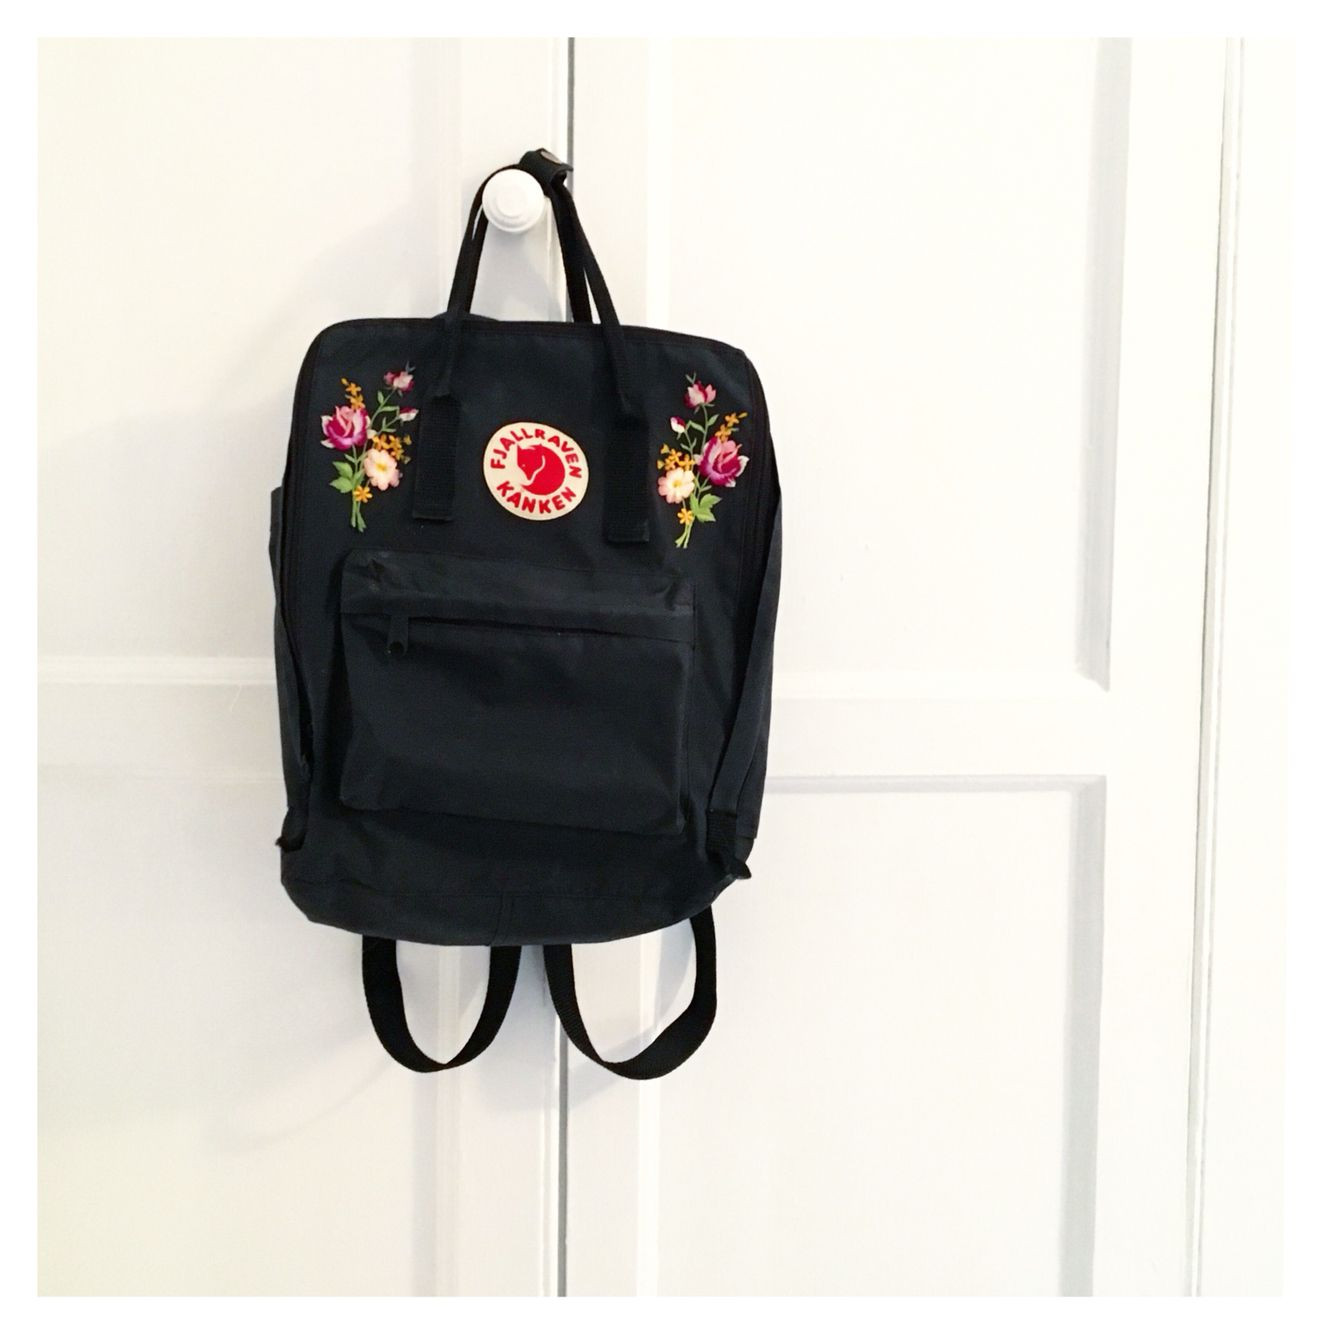 Pins On Backpack
 Pimped My fjallraven kanken with floral embroidery patches